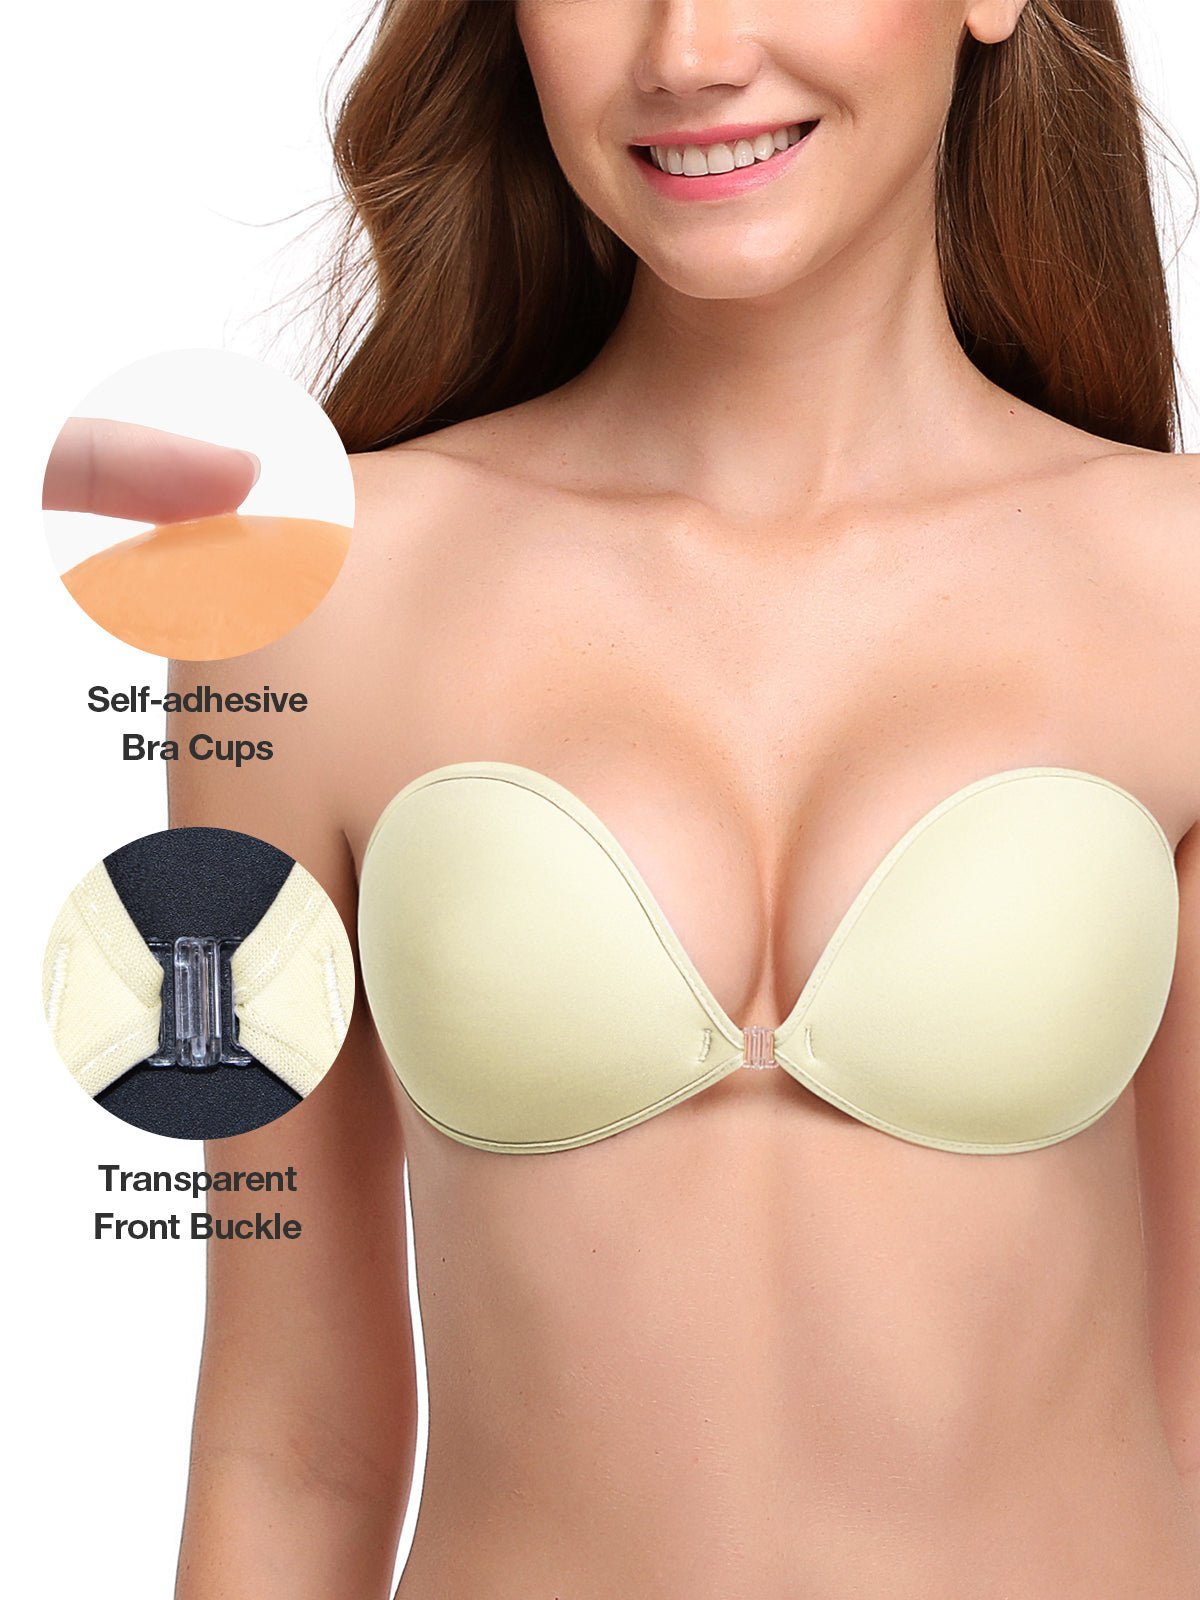 Wholesale Silicone Bra Glue For All Your Intimate Needs 